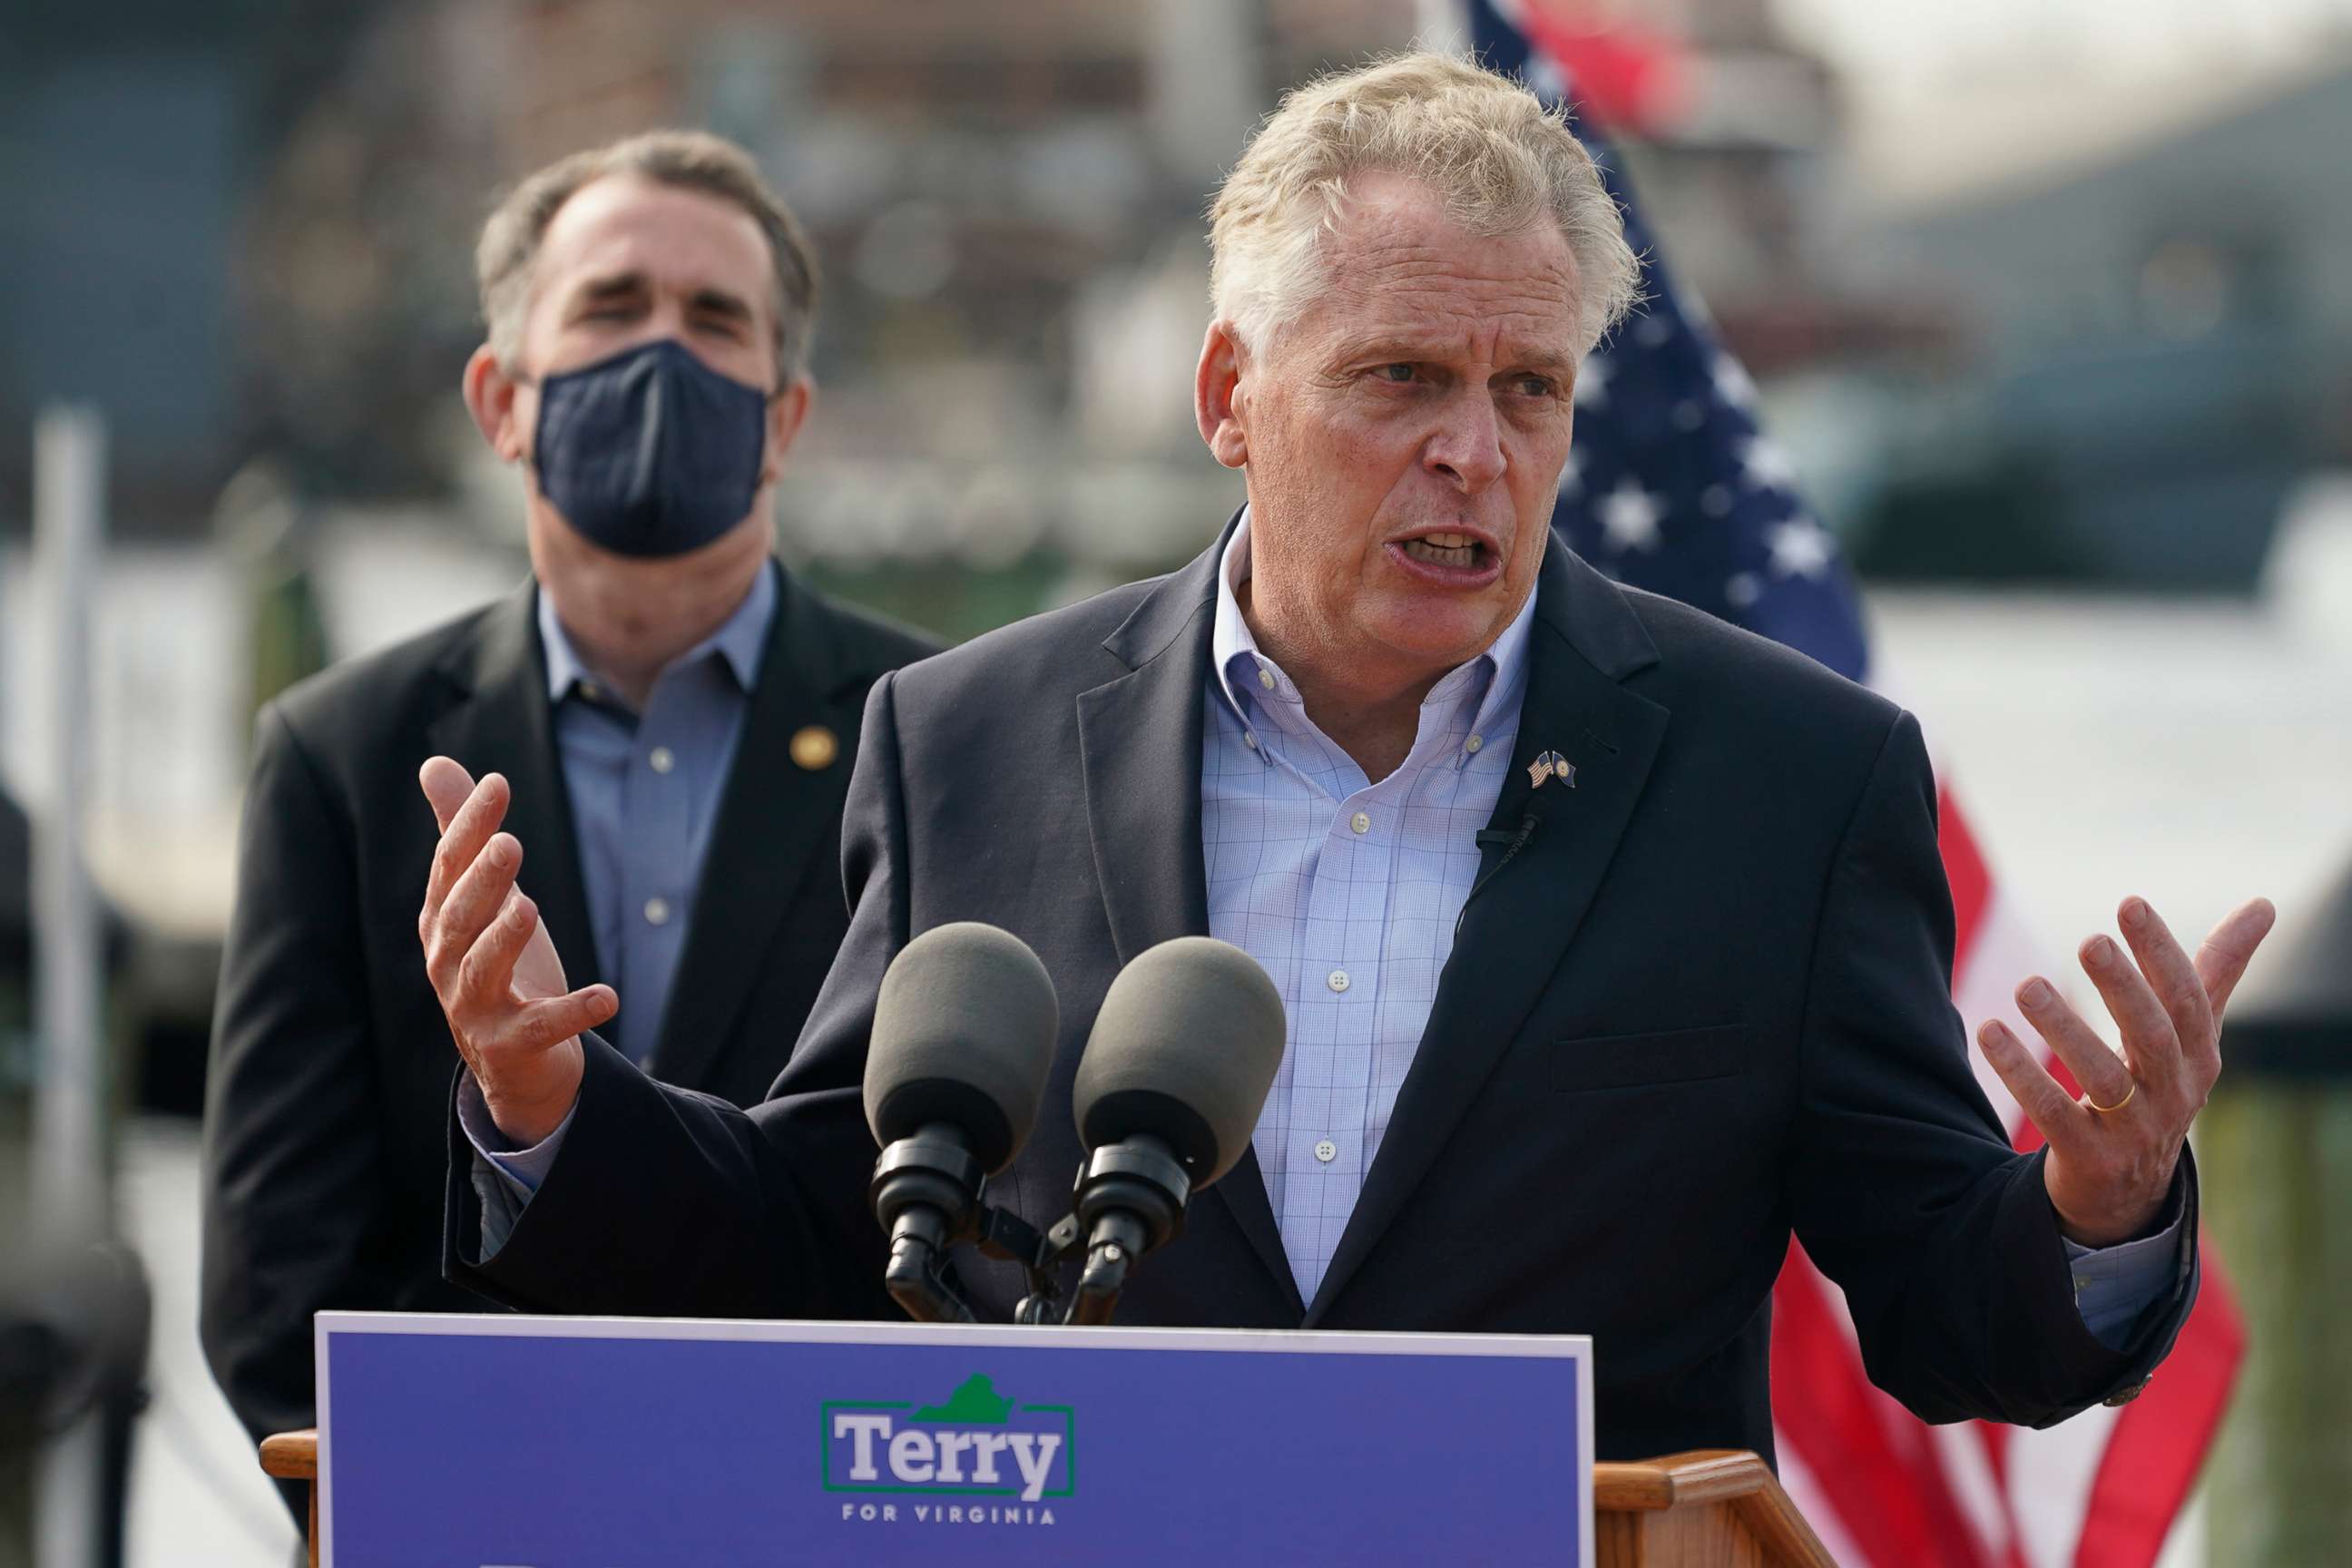 PHOTO: Former Virginia Gov. Terry McAuliffe, right, gestures during a news conference with Virginia Gov. Ralph Northam, left, at Waterside in Norfolk, Va., April 8, 2021.